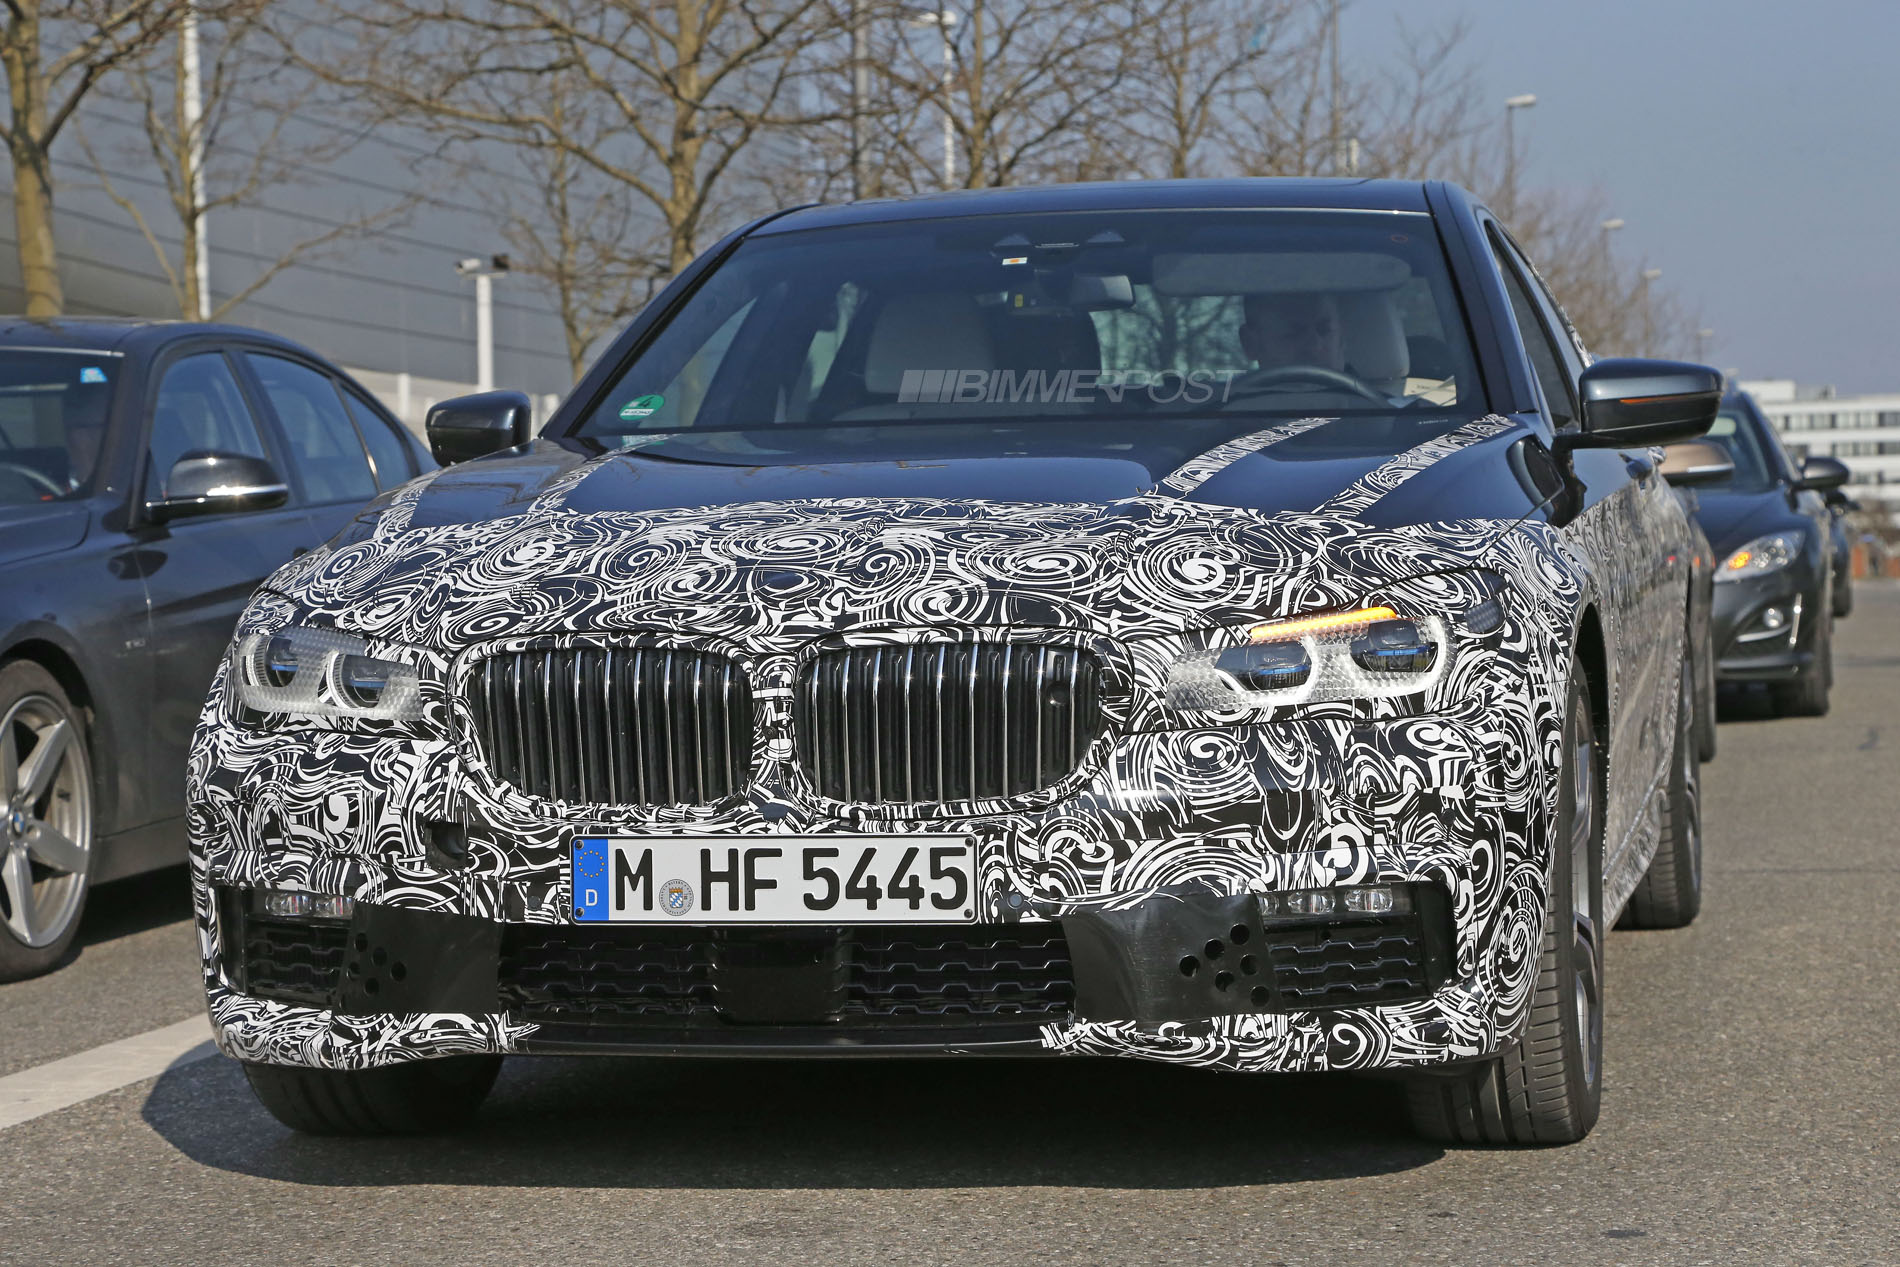 G11/G12 BMW 7 Series M Sport or M770i Spotted? - 7Post - 7 Series